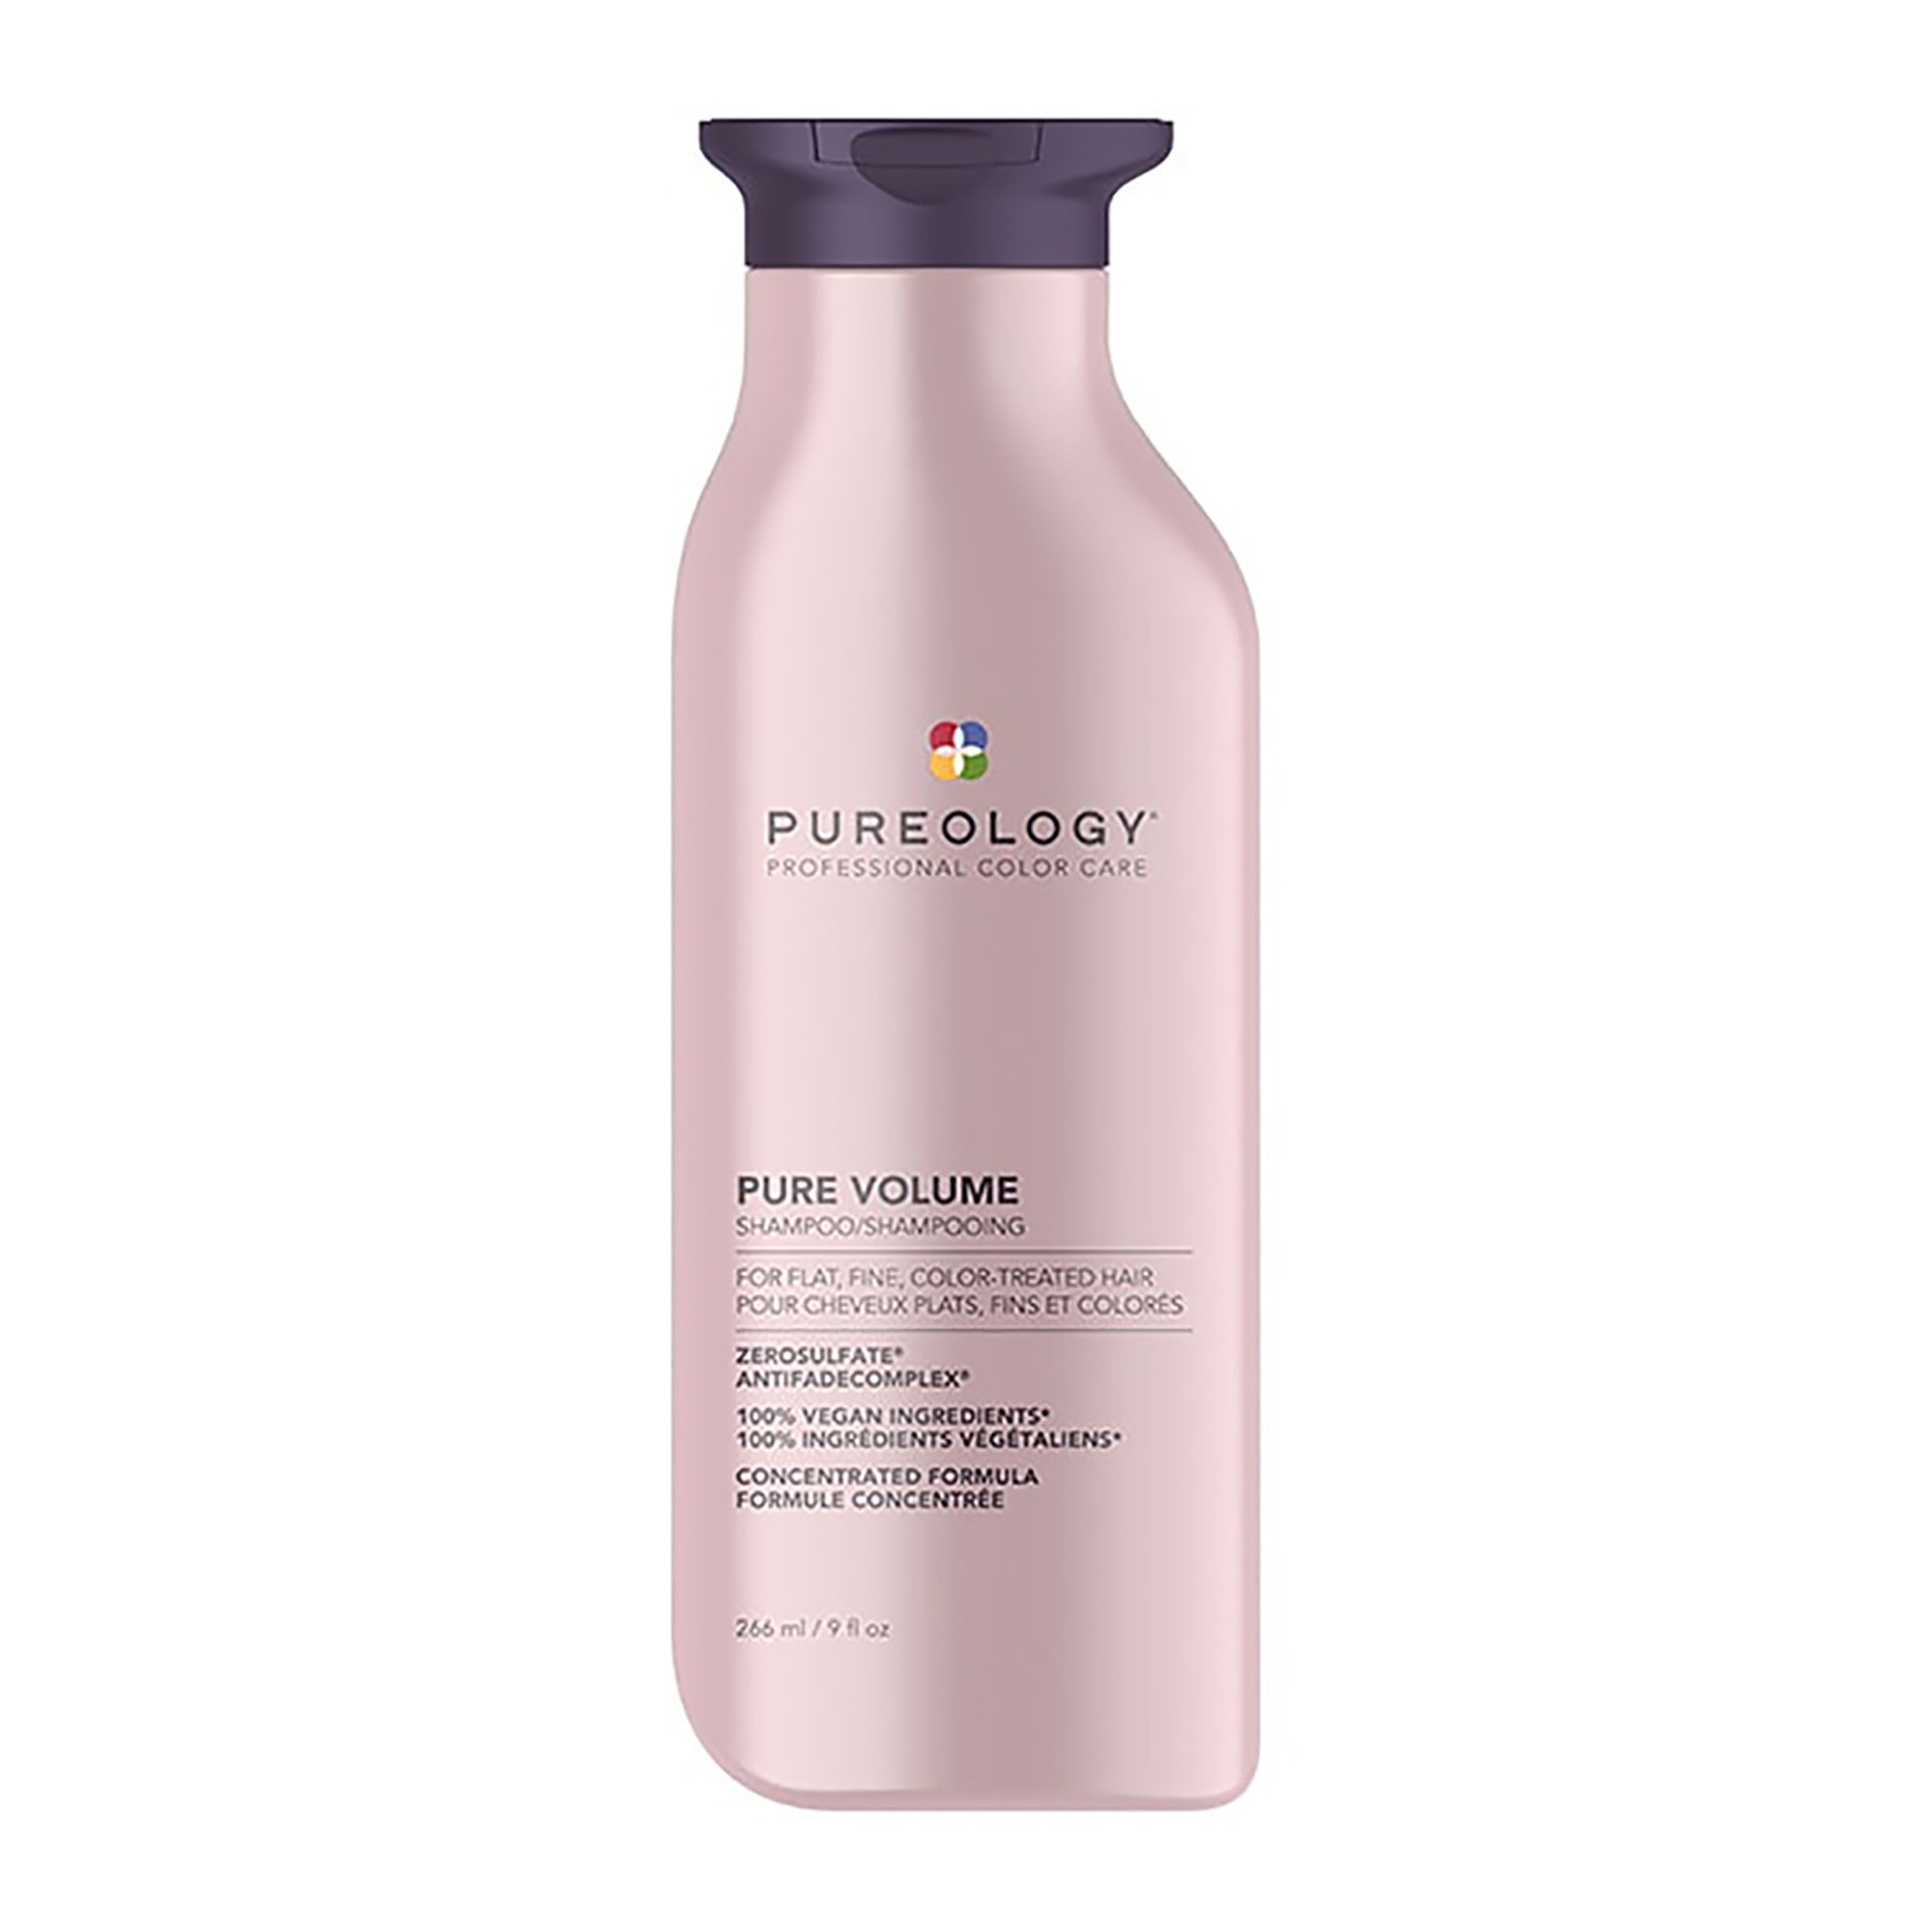 Pureology Pure Volume Shampoo and Conditioner Duo / 9OZ